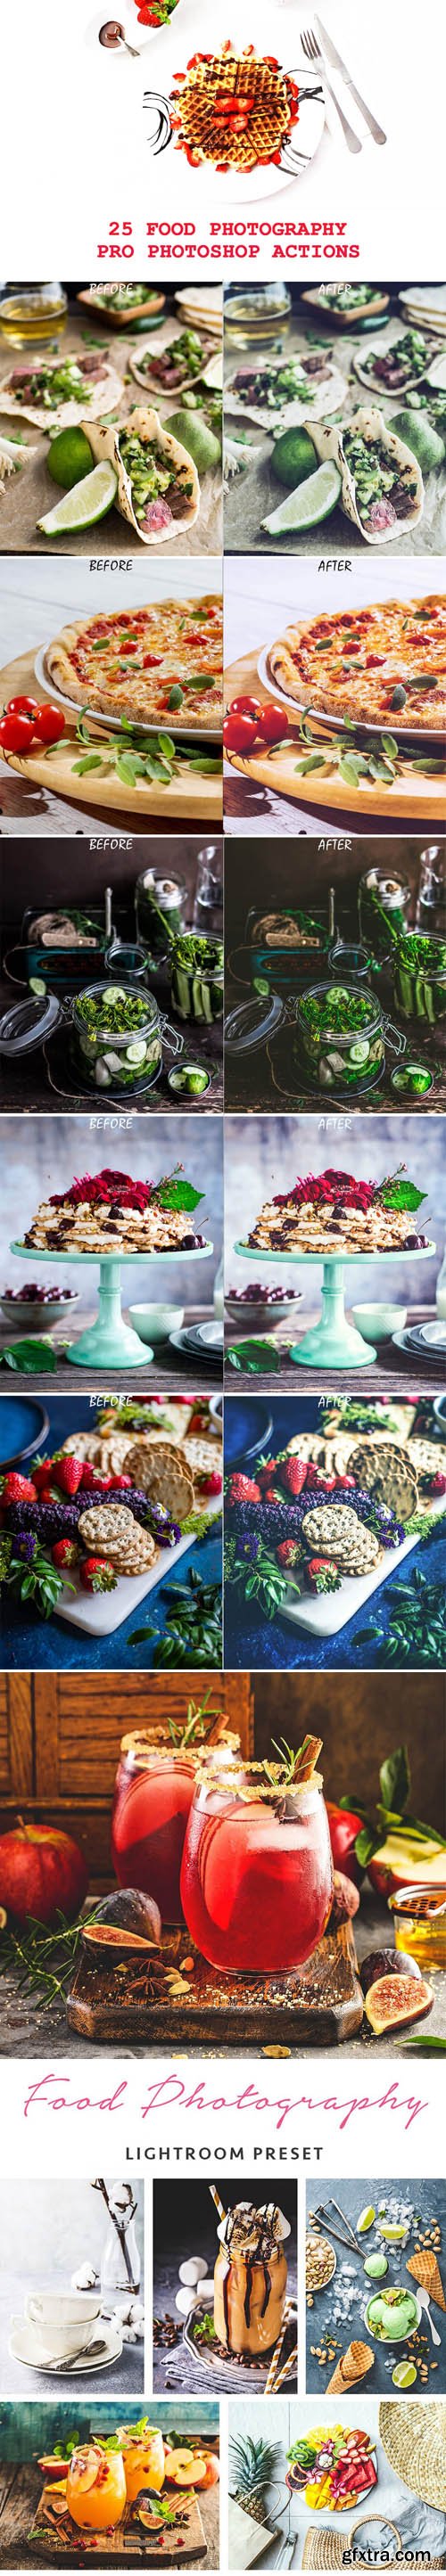 25 Food Photography Pro Photoshop Actions & Lightroom Presets